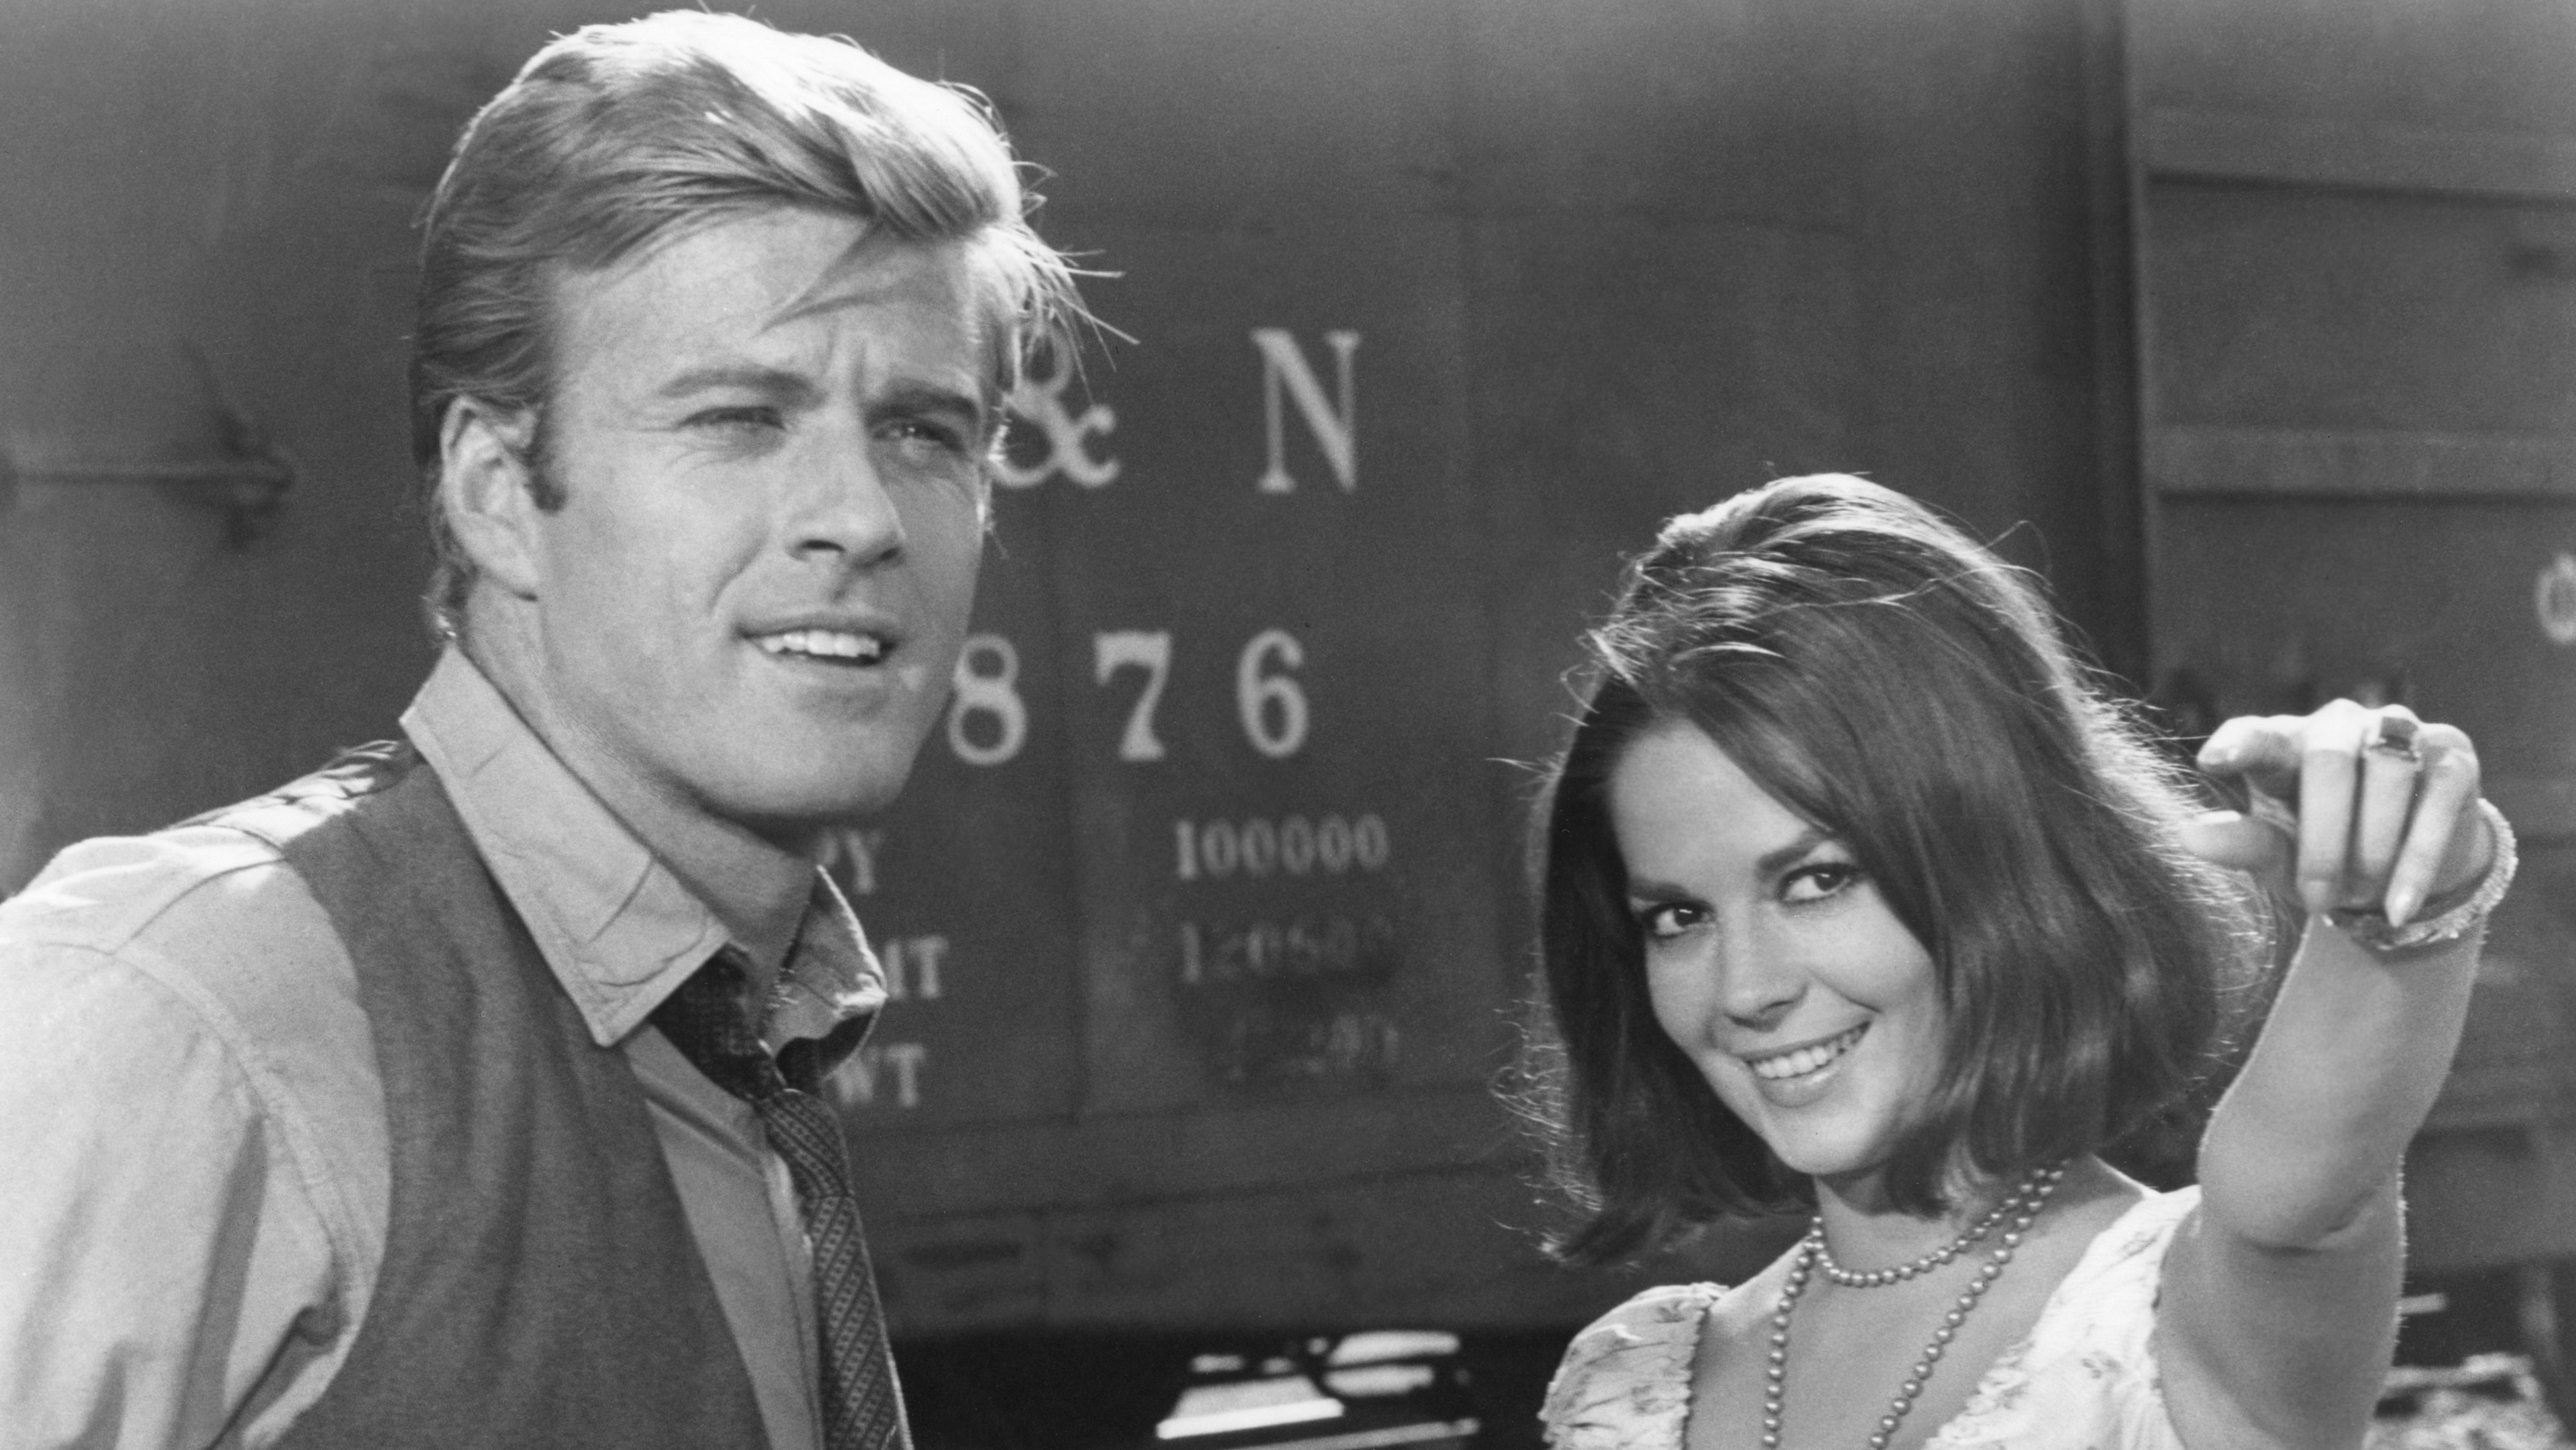 Robert Redford and Natalie Wood in This Property is Condemned